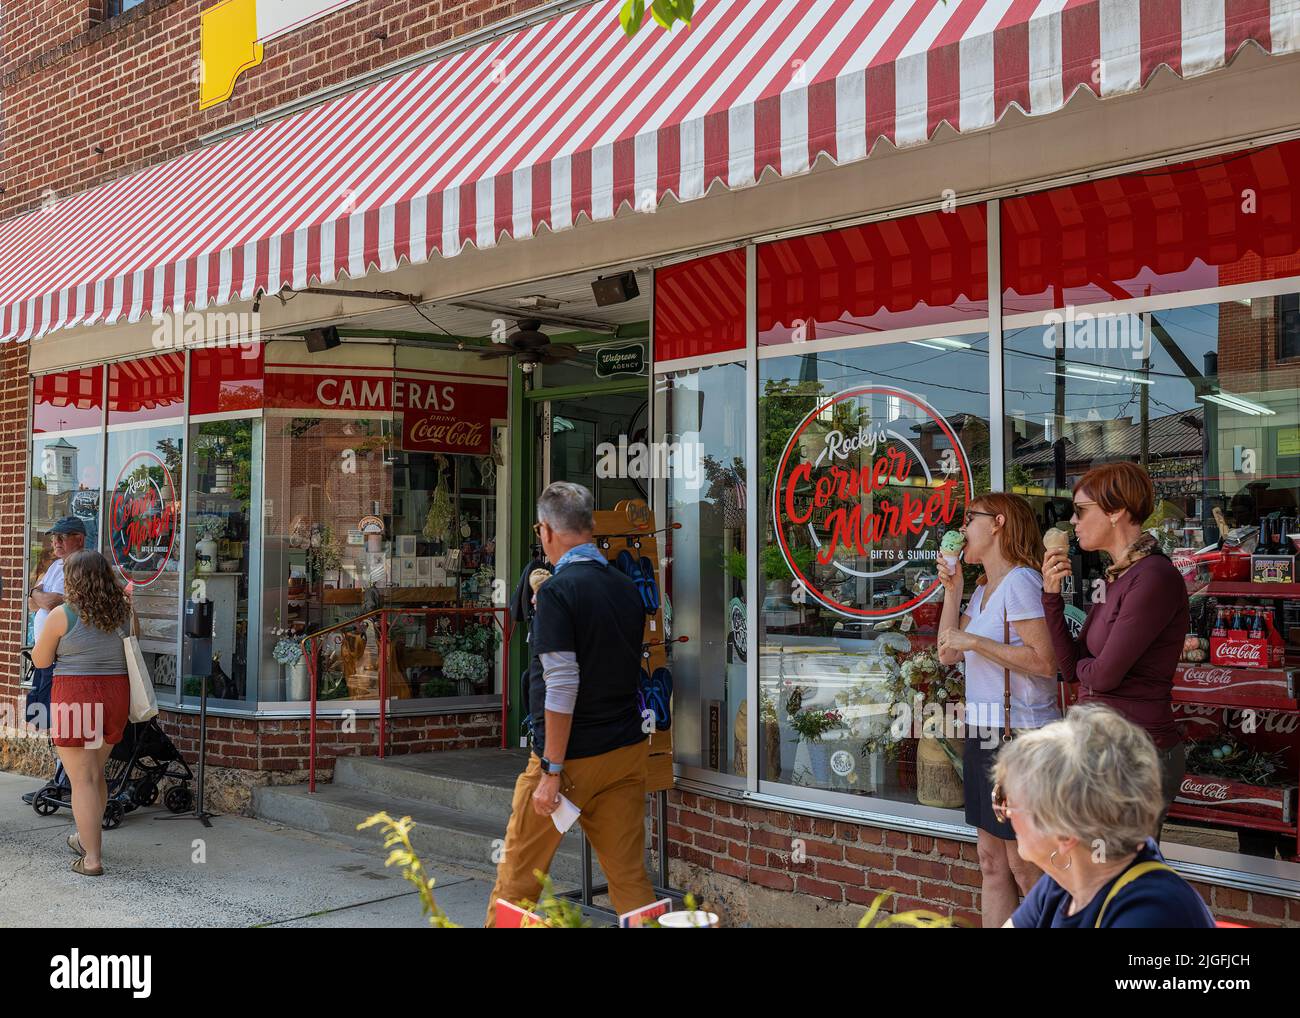 Brevard, North Carolina, USA - June 25, 2022: Tourist and residents co mingle in this little town where quaint shops and cafe's are a favorite. Stock Photo